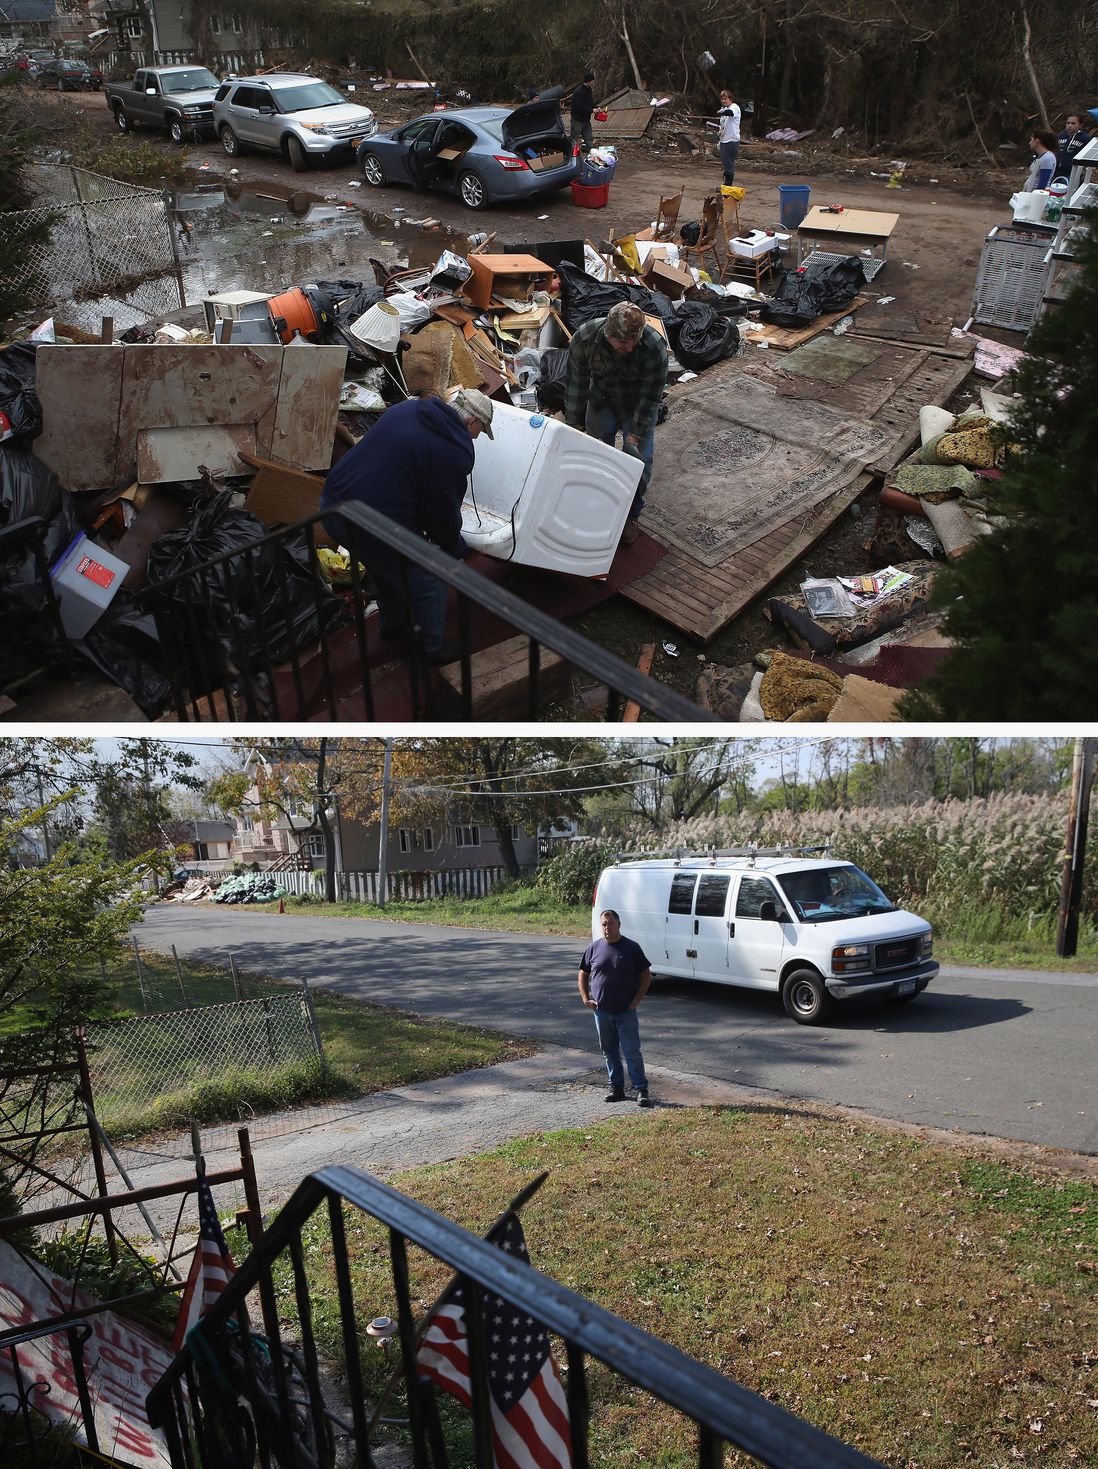 [Top] Members of the Hague family try to salvage a washing machine from their flood-damaged home after Hurricane Sandy on November 1, 2012 in the Ocean Breeze area in the Staten Island borough of New York City. [Bottom] Neighbor Frank Moszczynski watches over the Hague family home, still uninhabited almost a year after Hurricane Sandy October 17, 2013.